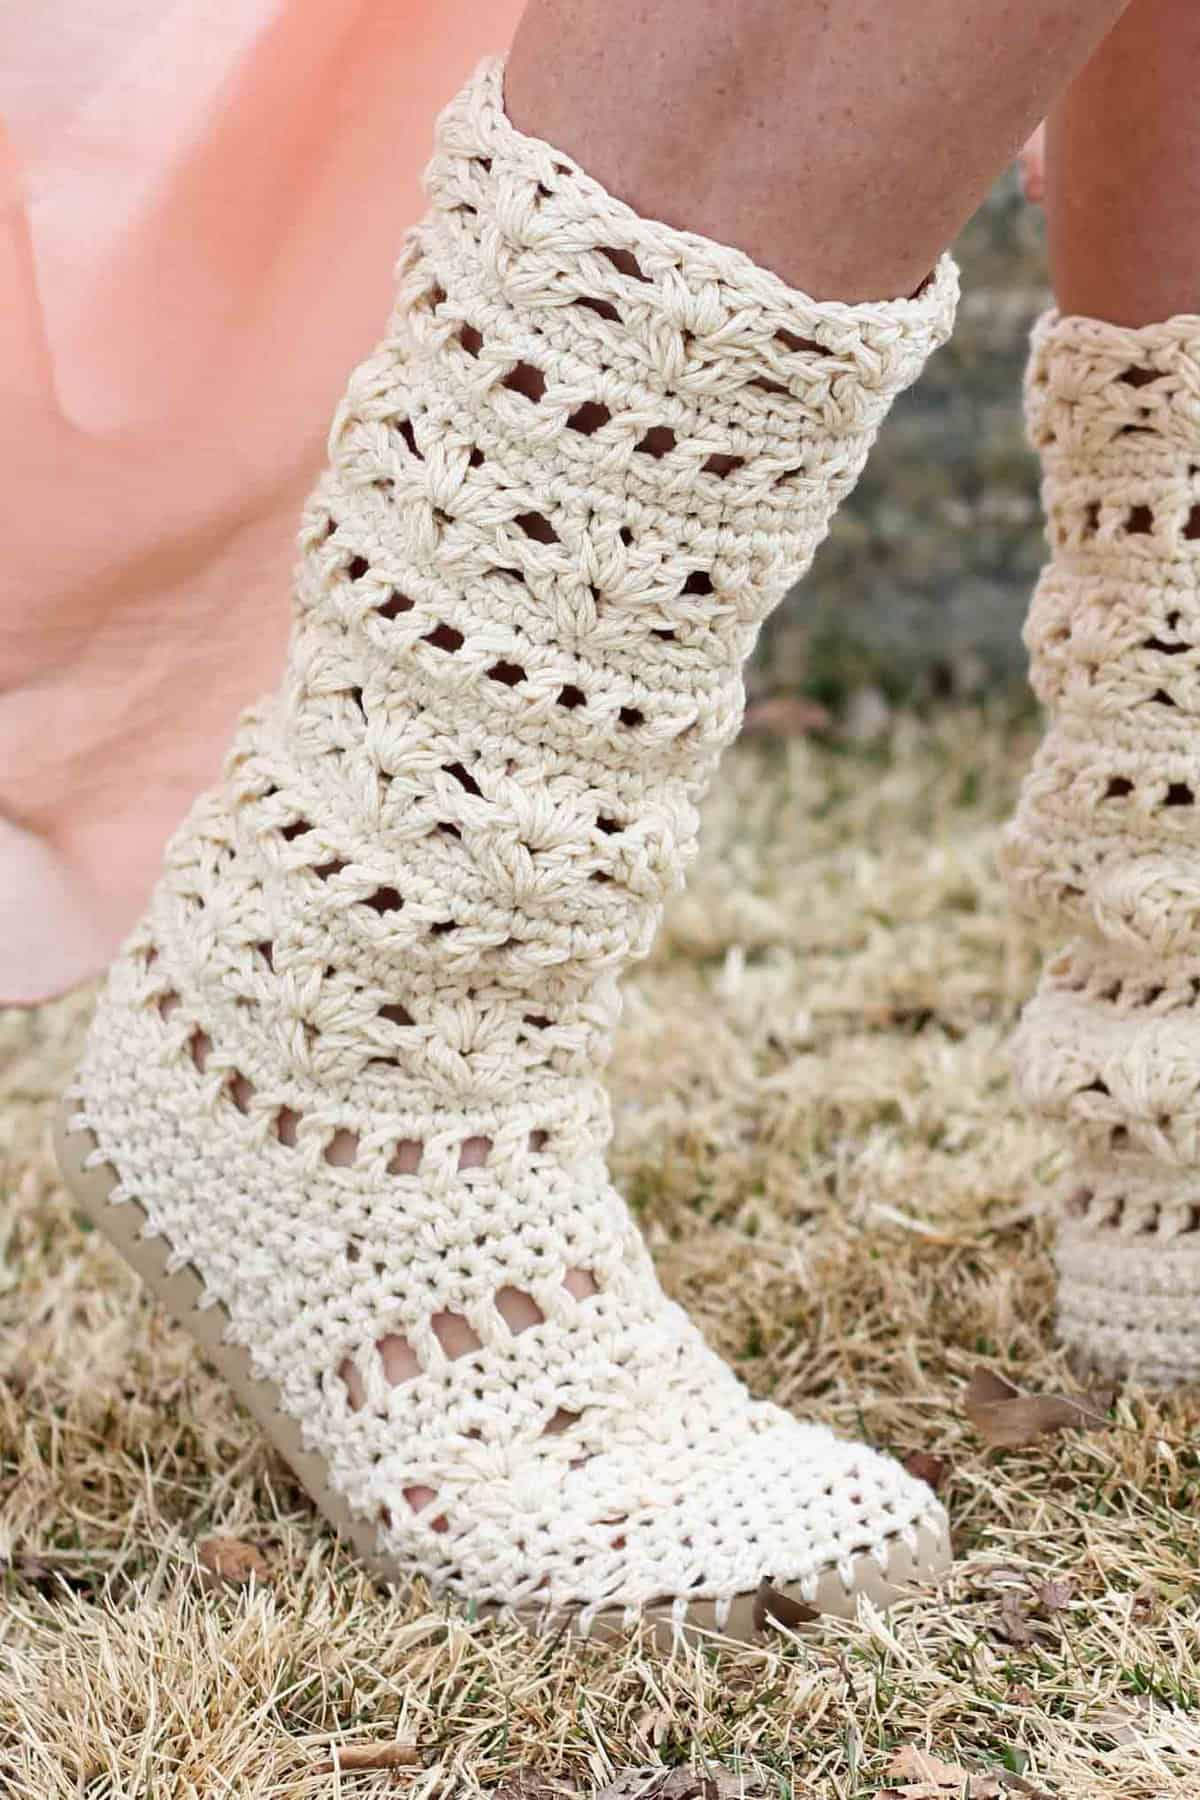 Whether you're headed to Coachella or your local concert in the park, this crochet boots pattern for adults will complete your boho-inspired outfits all season long! Made with Lion Brand 24/7 Cotton in Ecru. 